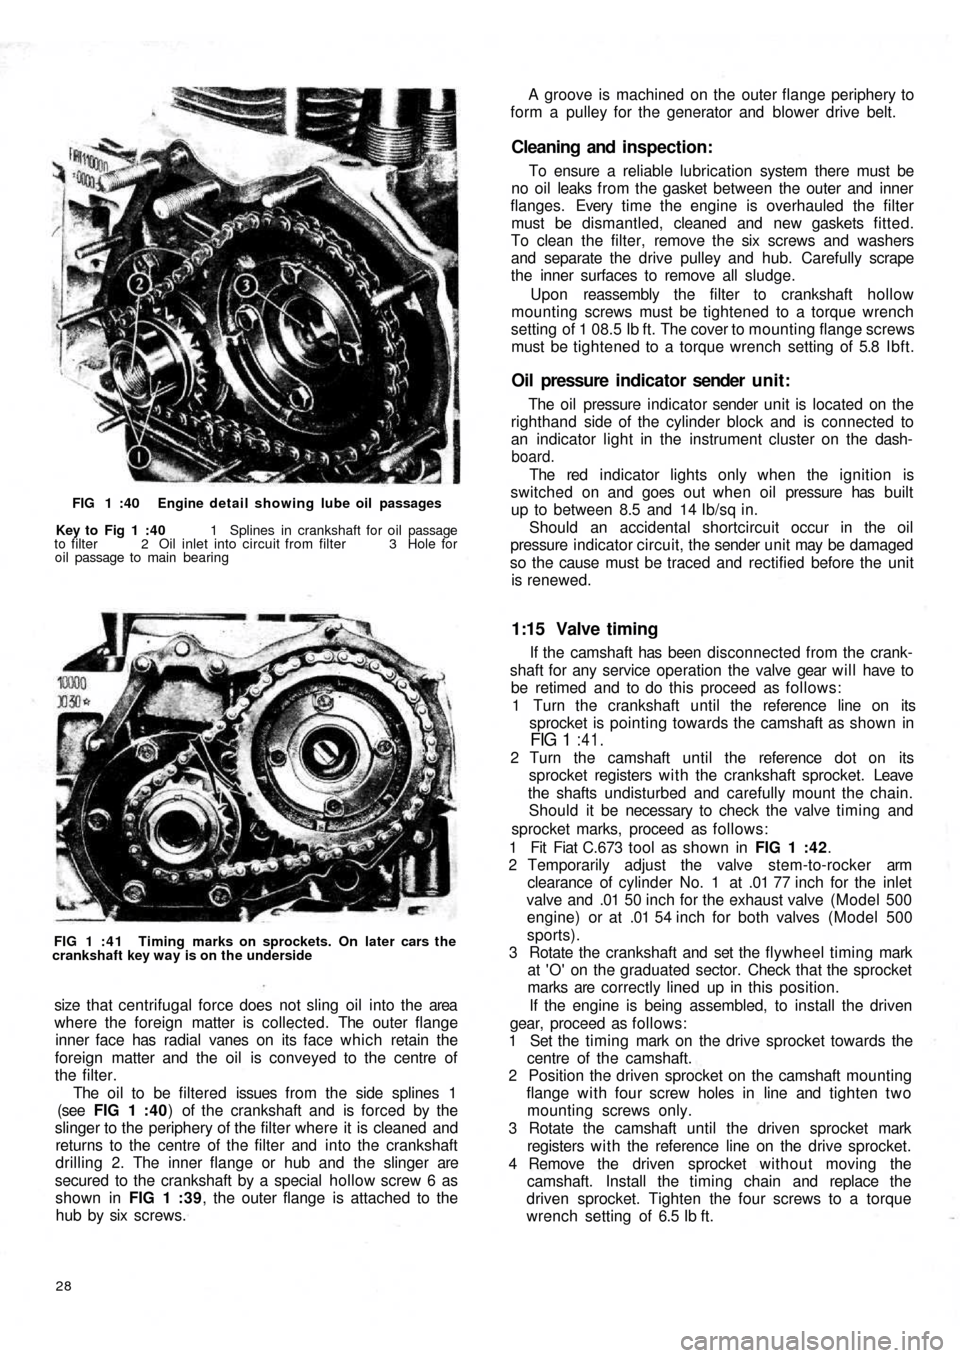 FIAT 500 1969 1.G Workshop Manual FIG 1 :40  Engine detail showing lube oil passages
Key to Fig 1 :40  1  Splines in crankshaft for oil passage
to filter  2  Oil inlet into circuit from filter 3 Hole for
oil passage to main bearing
FI